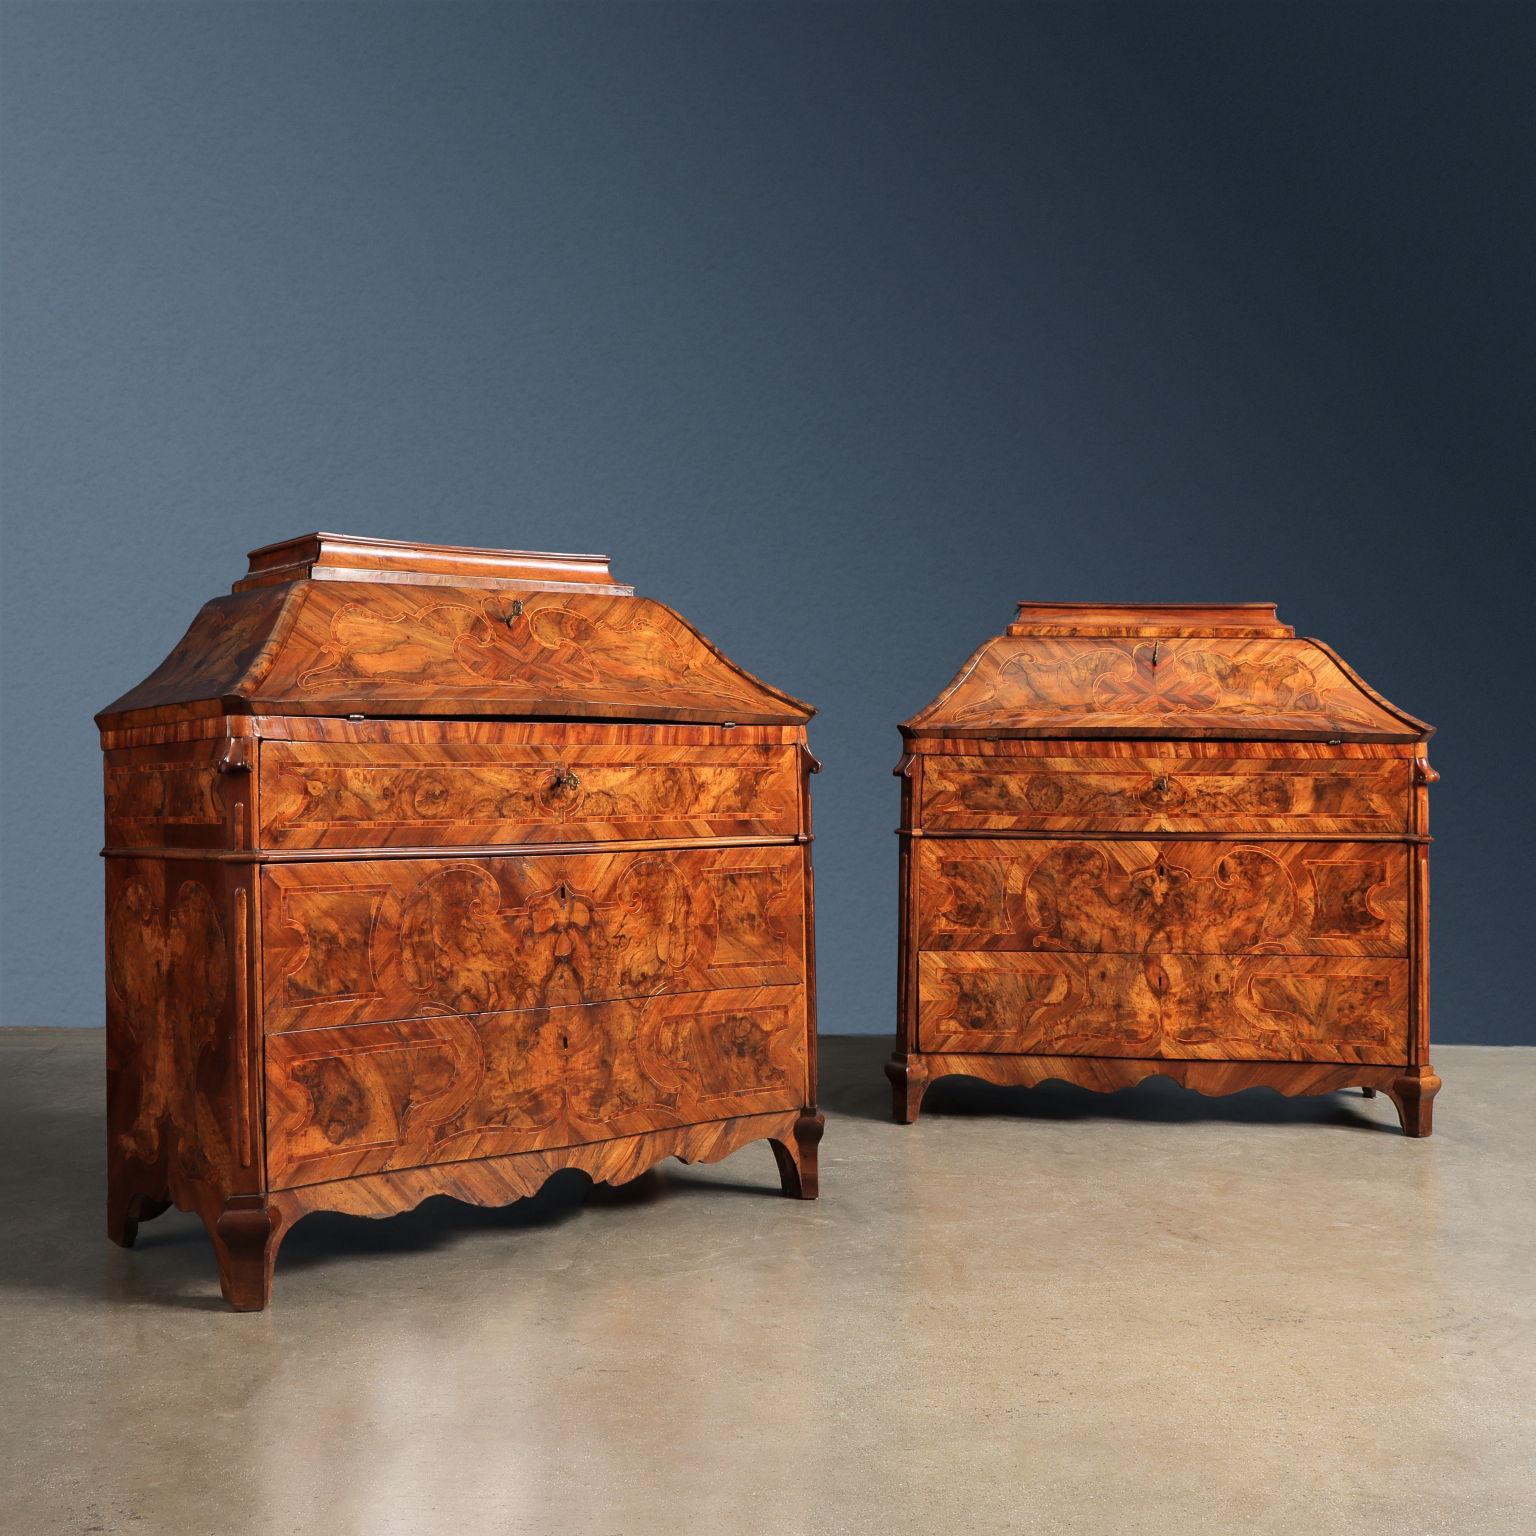 Pair of flaps slightly moved like a leaf on the front where three drawers are housed; the furniture continues in the upper part moving like an urn and ending in a backsplash with a removable drawer. The flap door conceals a cabinet made up of four